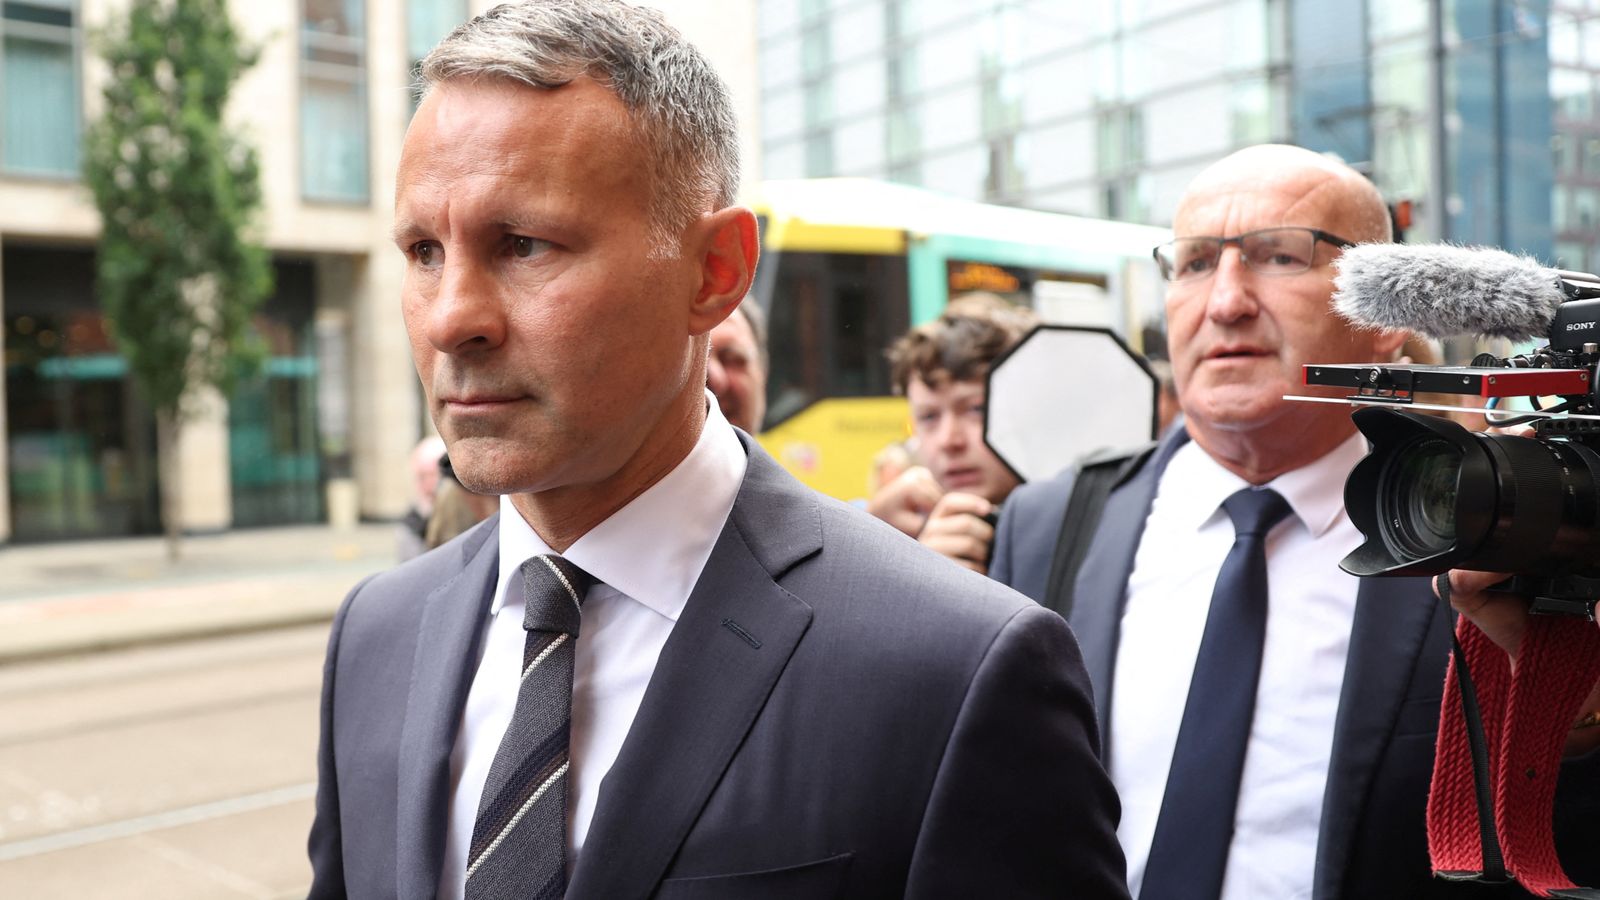 Ryan Giggs trial live: Former Manchester United star accused of attacking and controlling ex-girlfriend Kate Greville